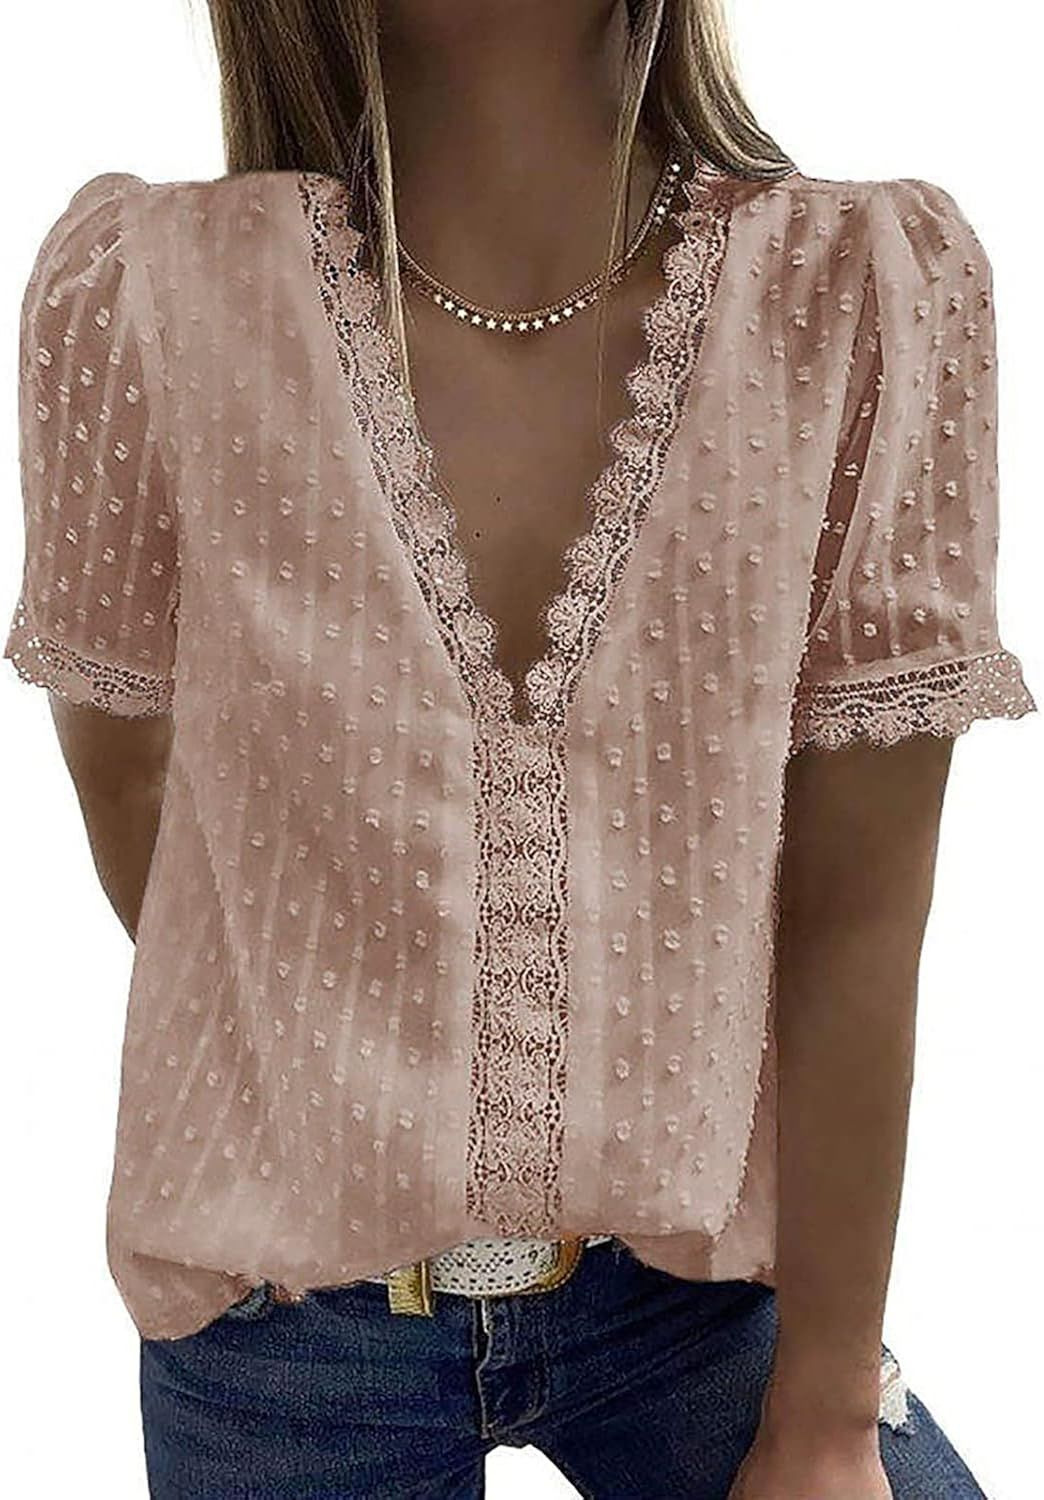 Cisisily Women's V Neck Lace Crochet Tops Casual T Shirts Blouses Tops | Amazon (US)